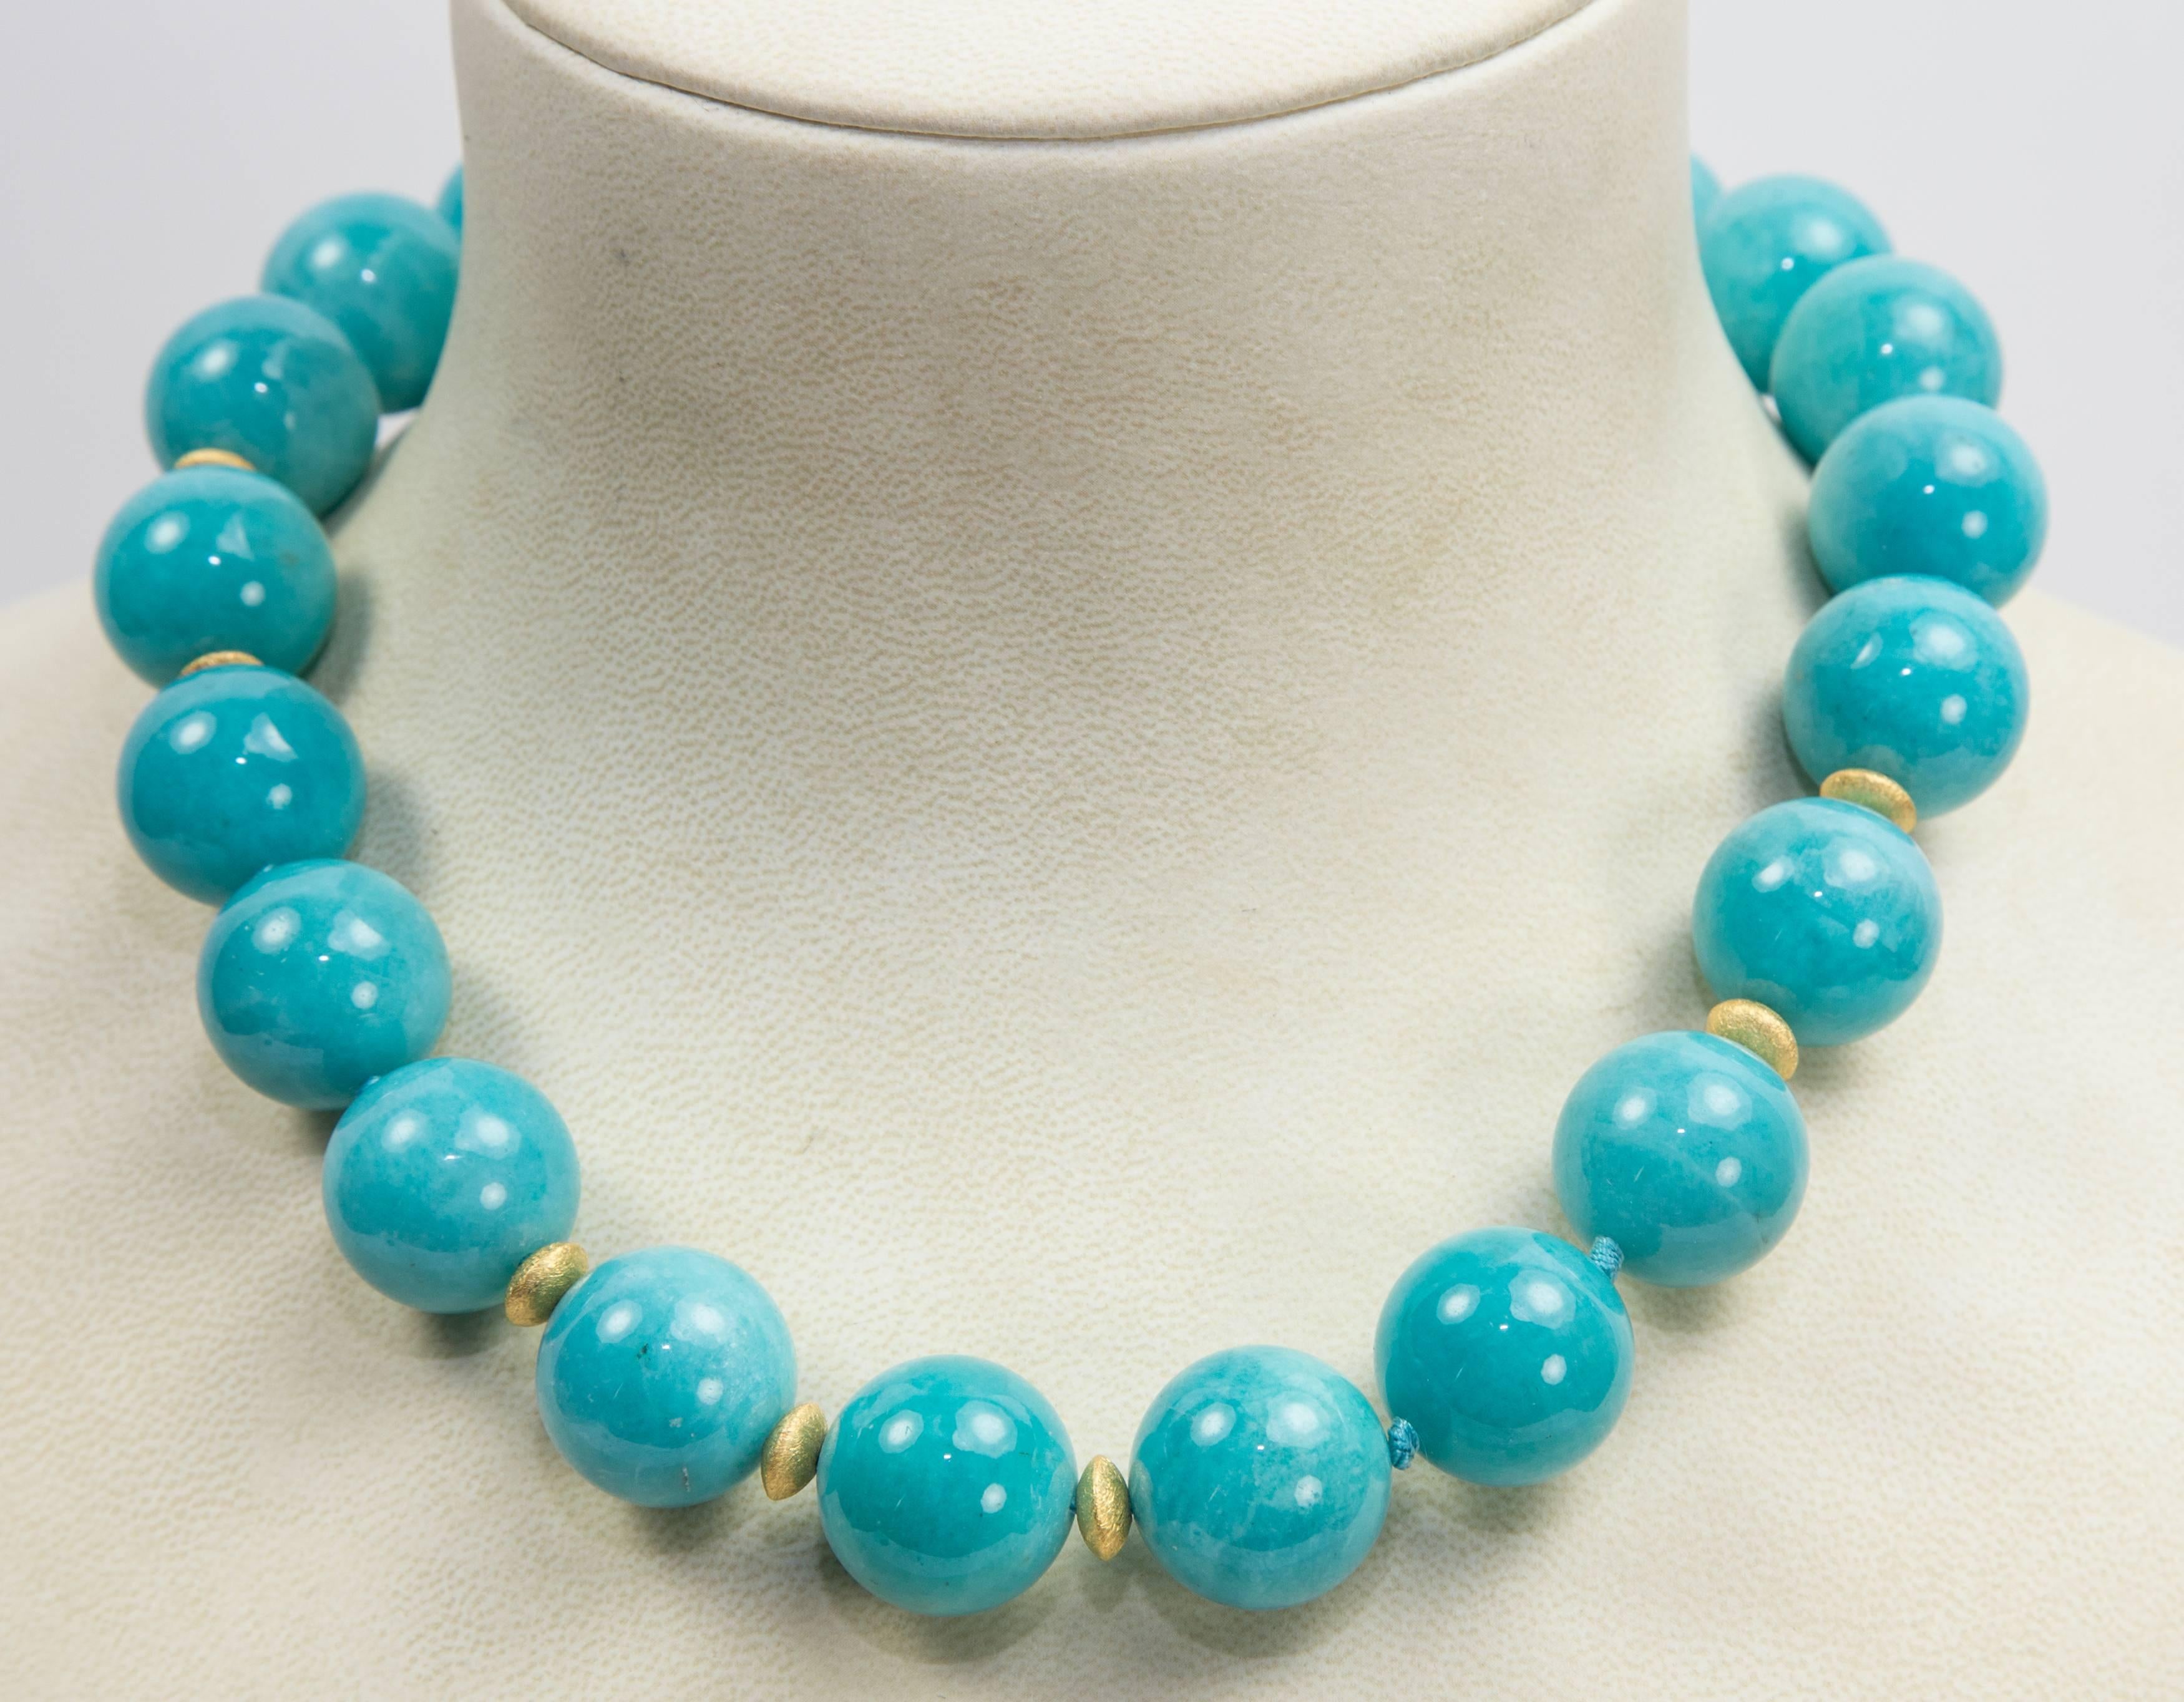 Stunning large Turquoise Blue Amazonite Natural Bead necklace enhanced by gilded sterling silver spacers. Hand knotted on matching blue thread and finished with a Gilded Sterling Silver circular clasp. Necklace measures approx. 19”. Spectacular in